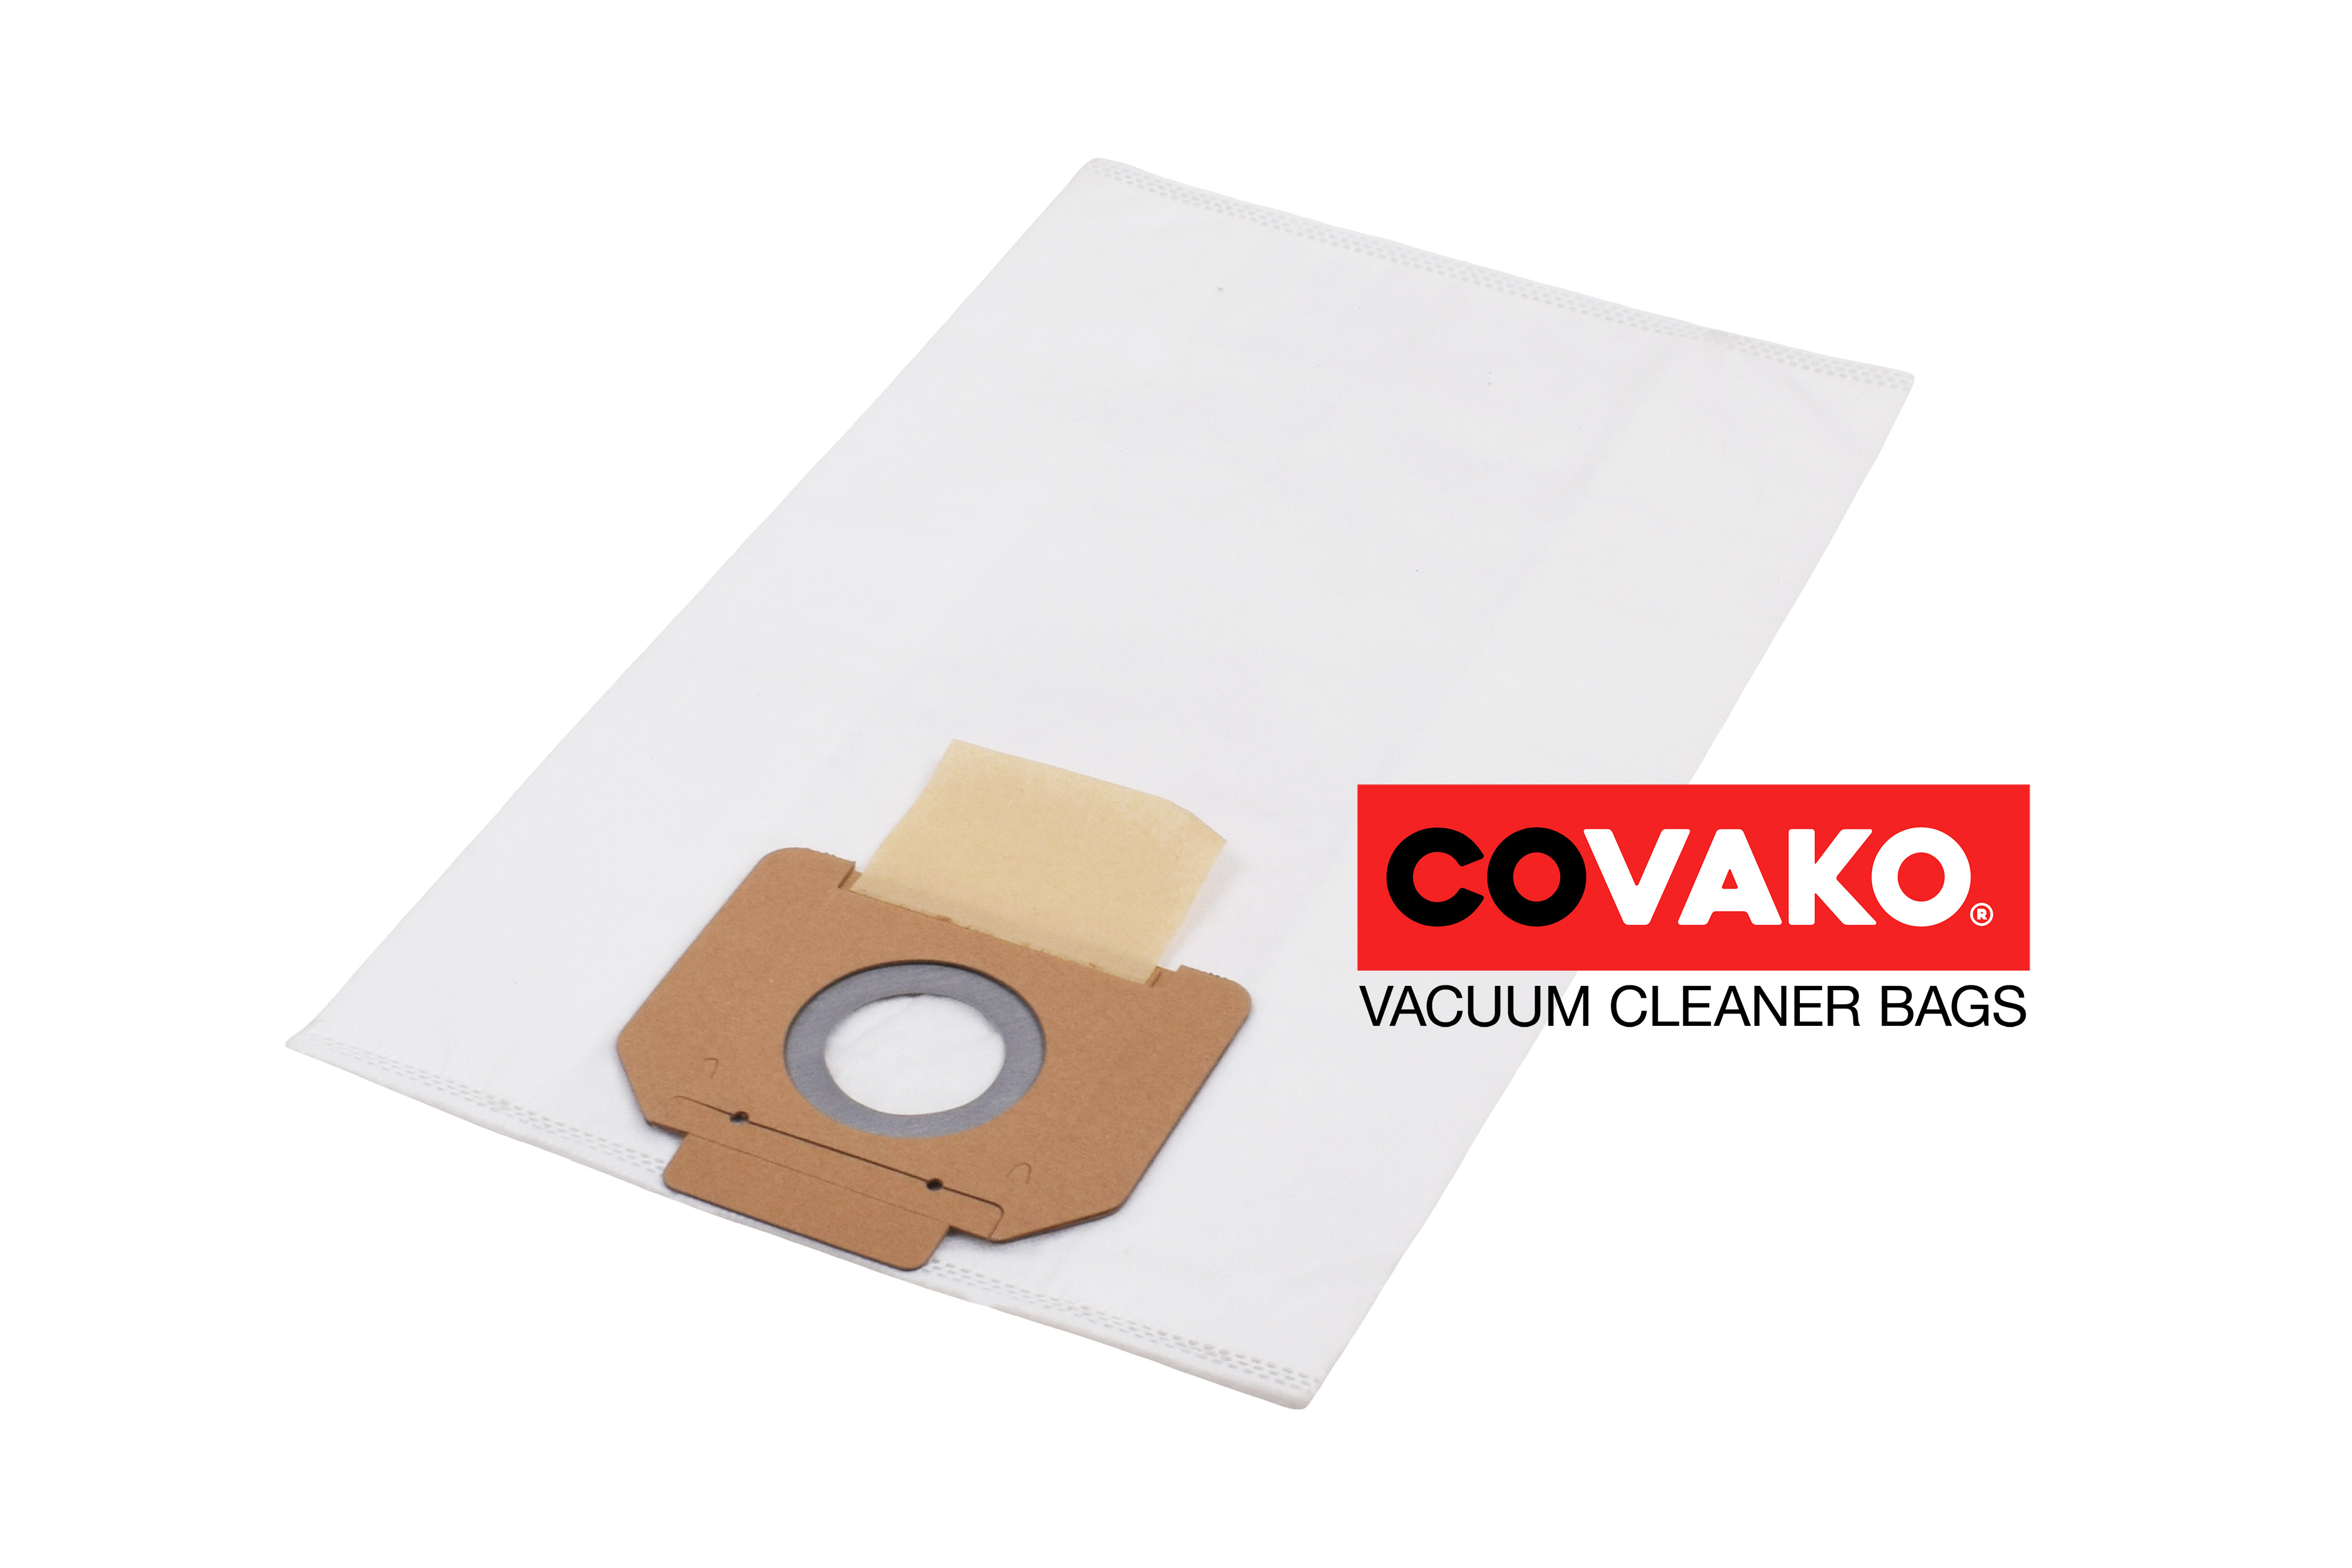 Cleancraft wetCat 130 IRH / Synthesis - Cleancraft vacuum cleaner bags